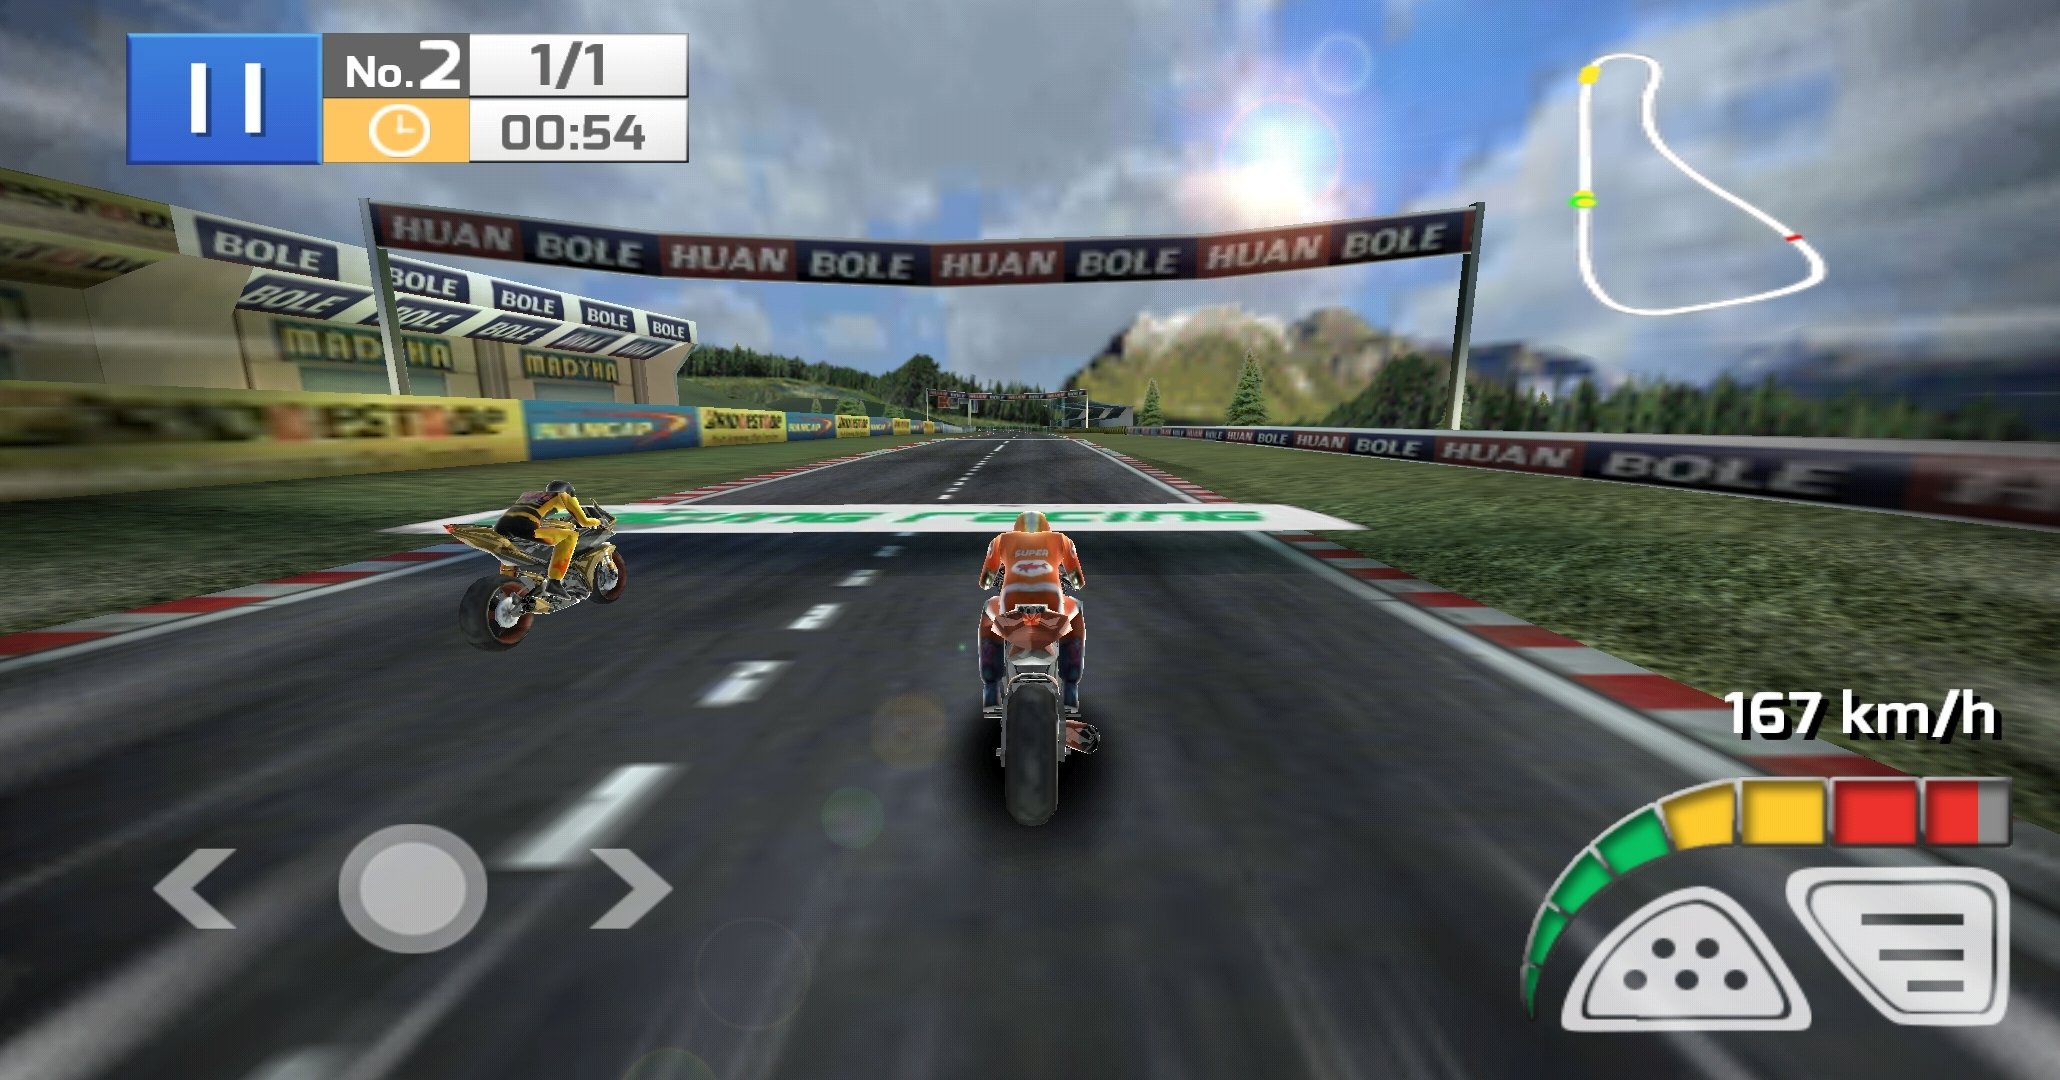 bike race game for android free download